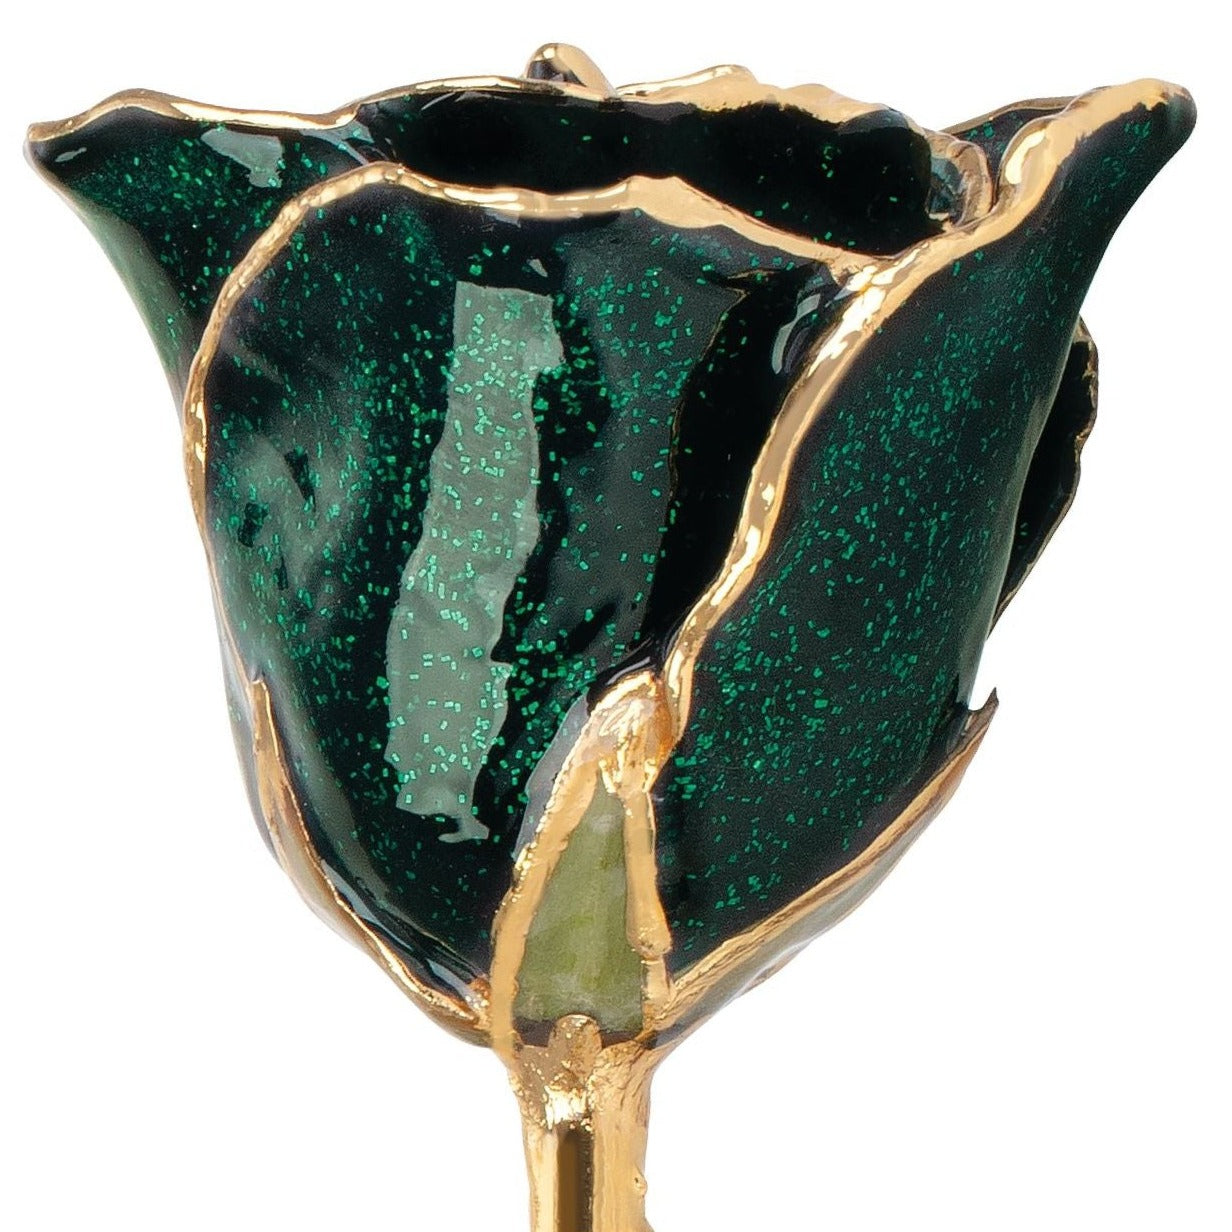 Preserved Sparkle Emerald Colored Rose with 24K Gold Trim for Luxury Home Decor